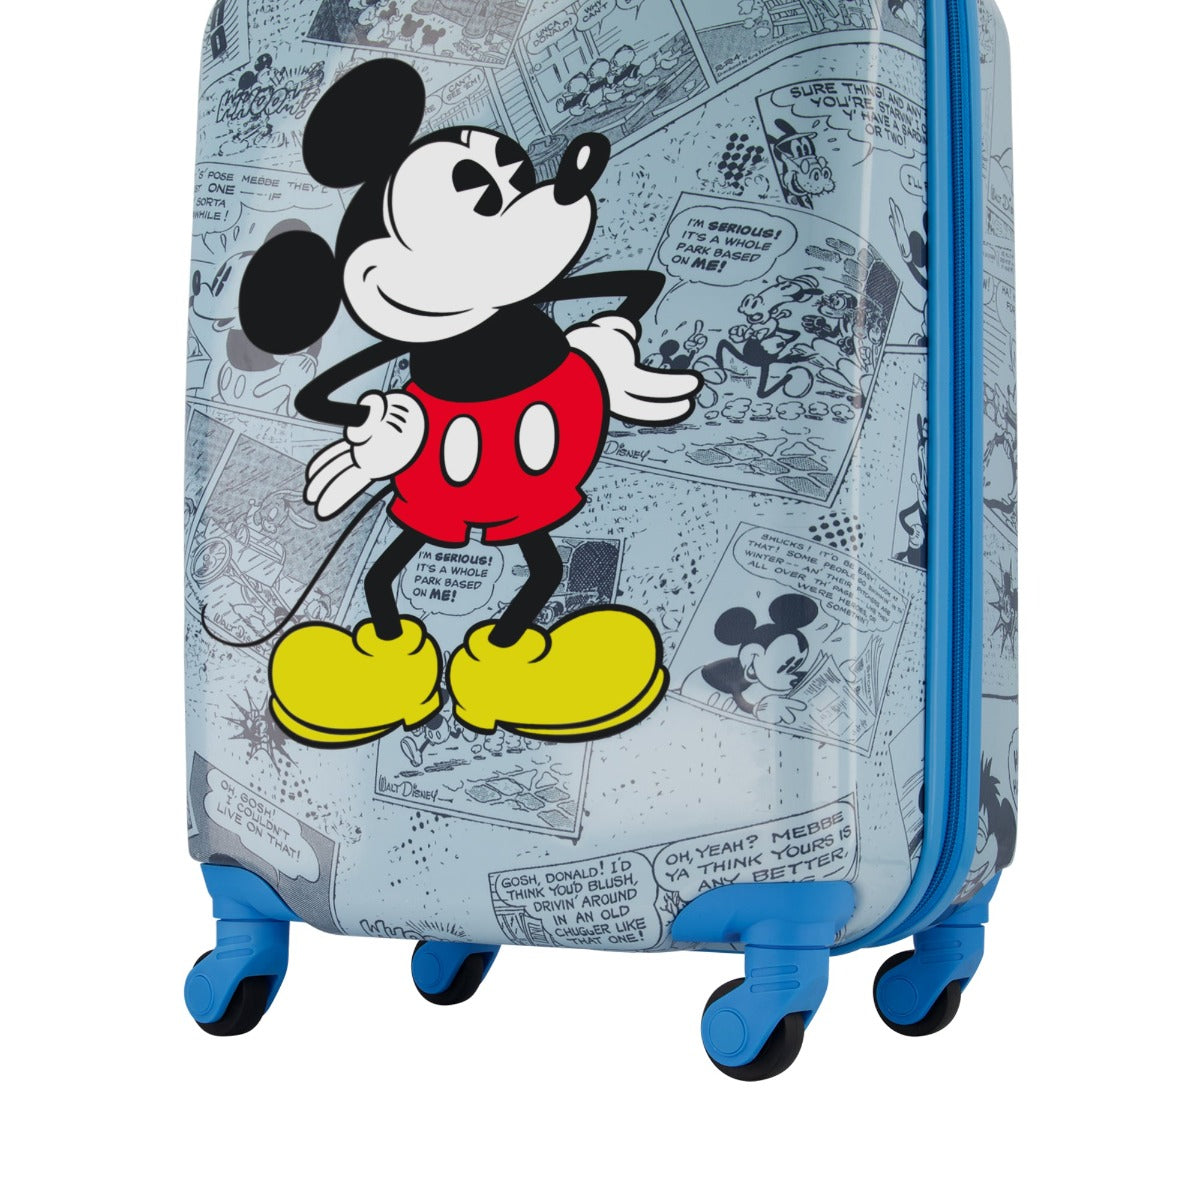 Blue Disney Heritage Mikey Mouse matching 2 piece set - kids 21" rolling luggage for travel